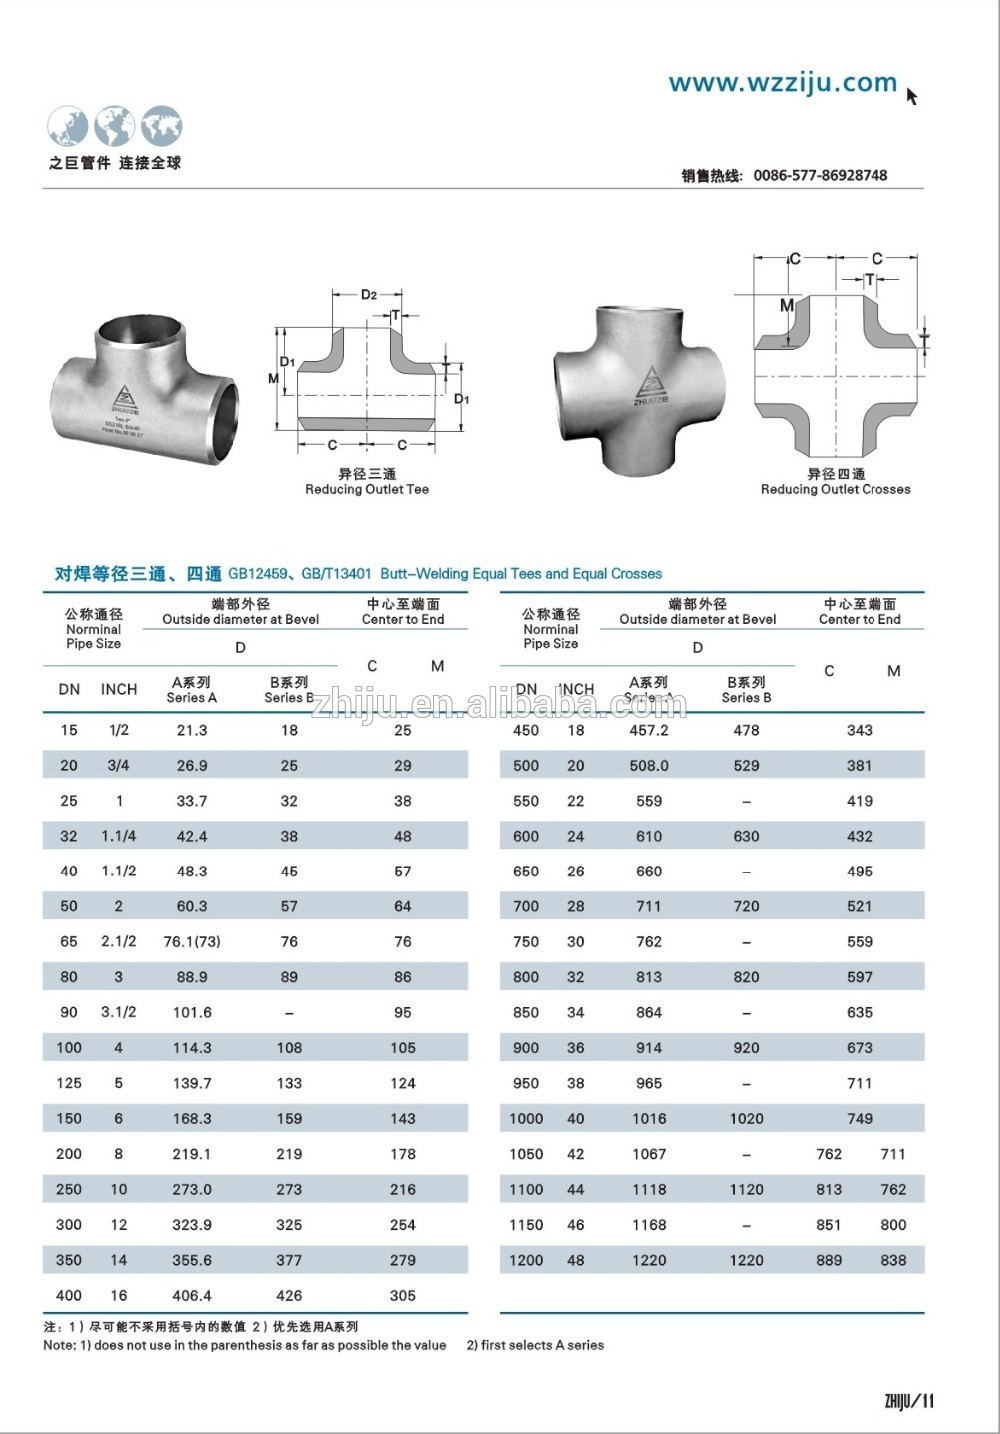 ANSI B16.9 Stainless Steel Pipe Fitting 3/4'' Equal Tee